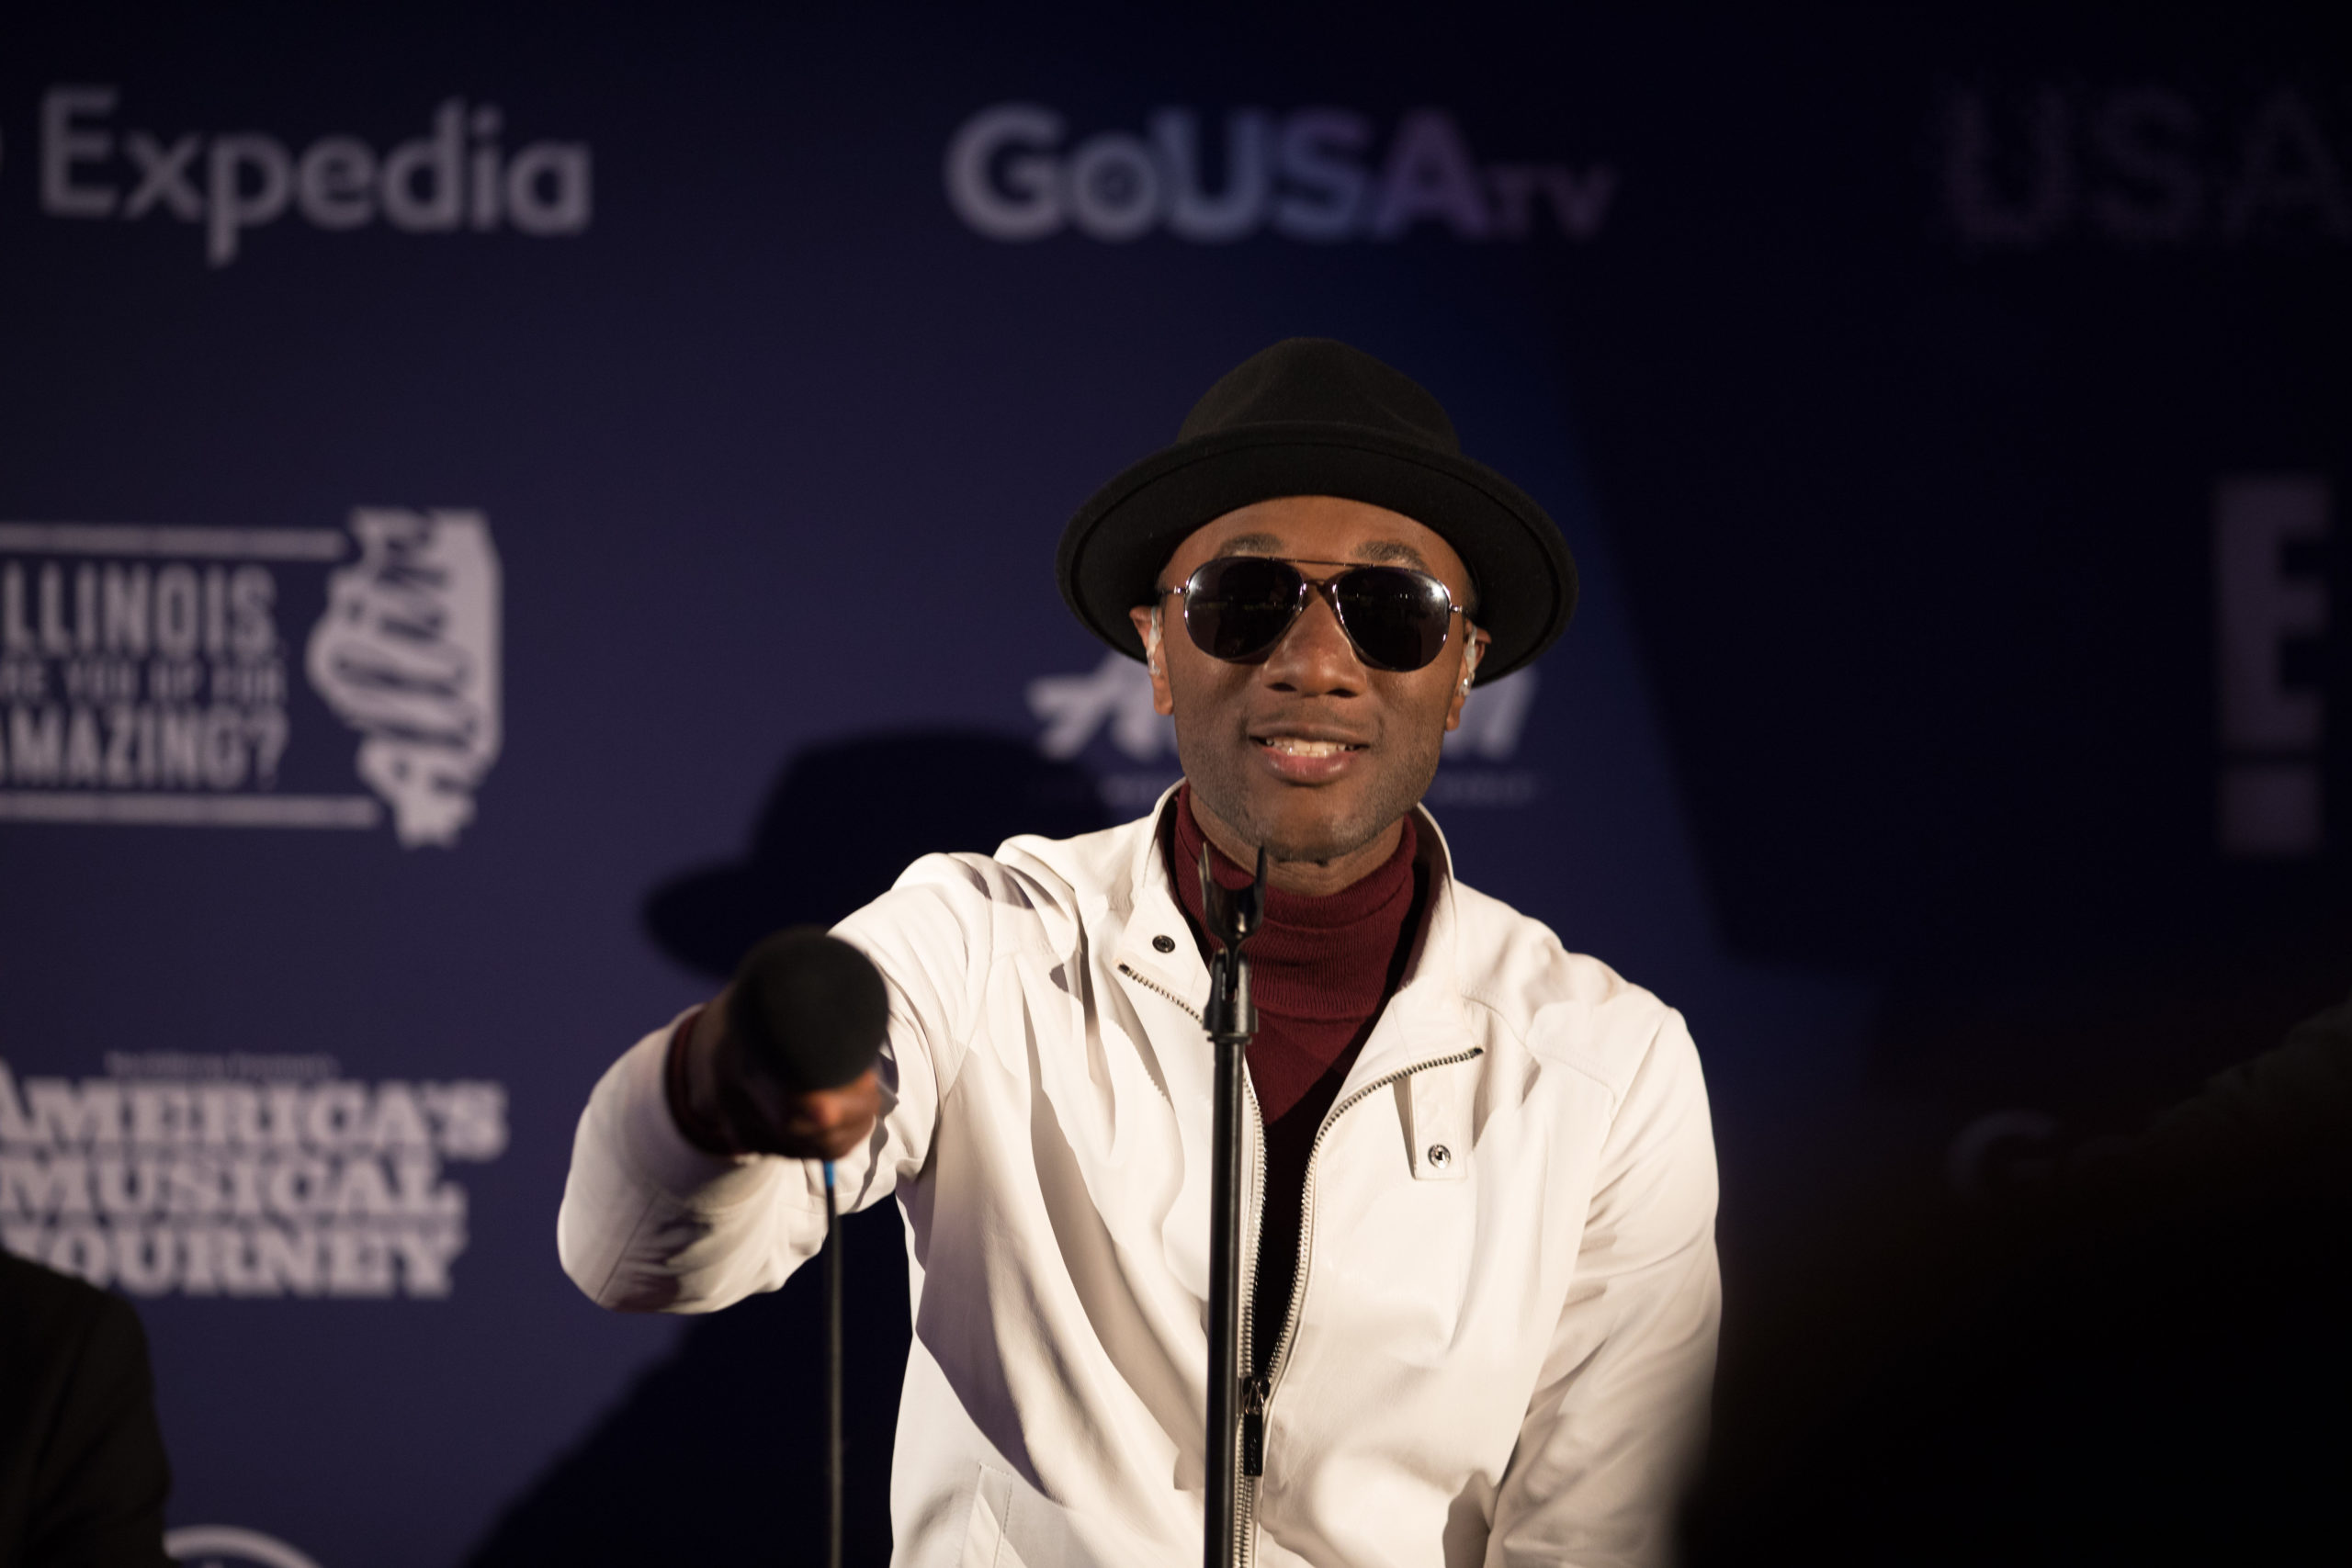 Aloe Blacc performing live at The Science Museum